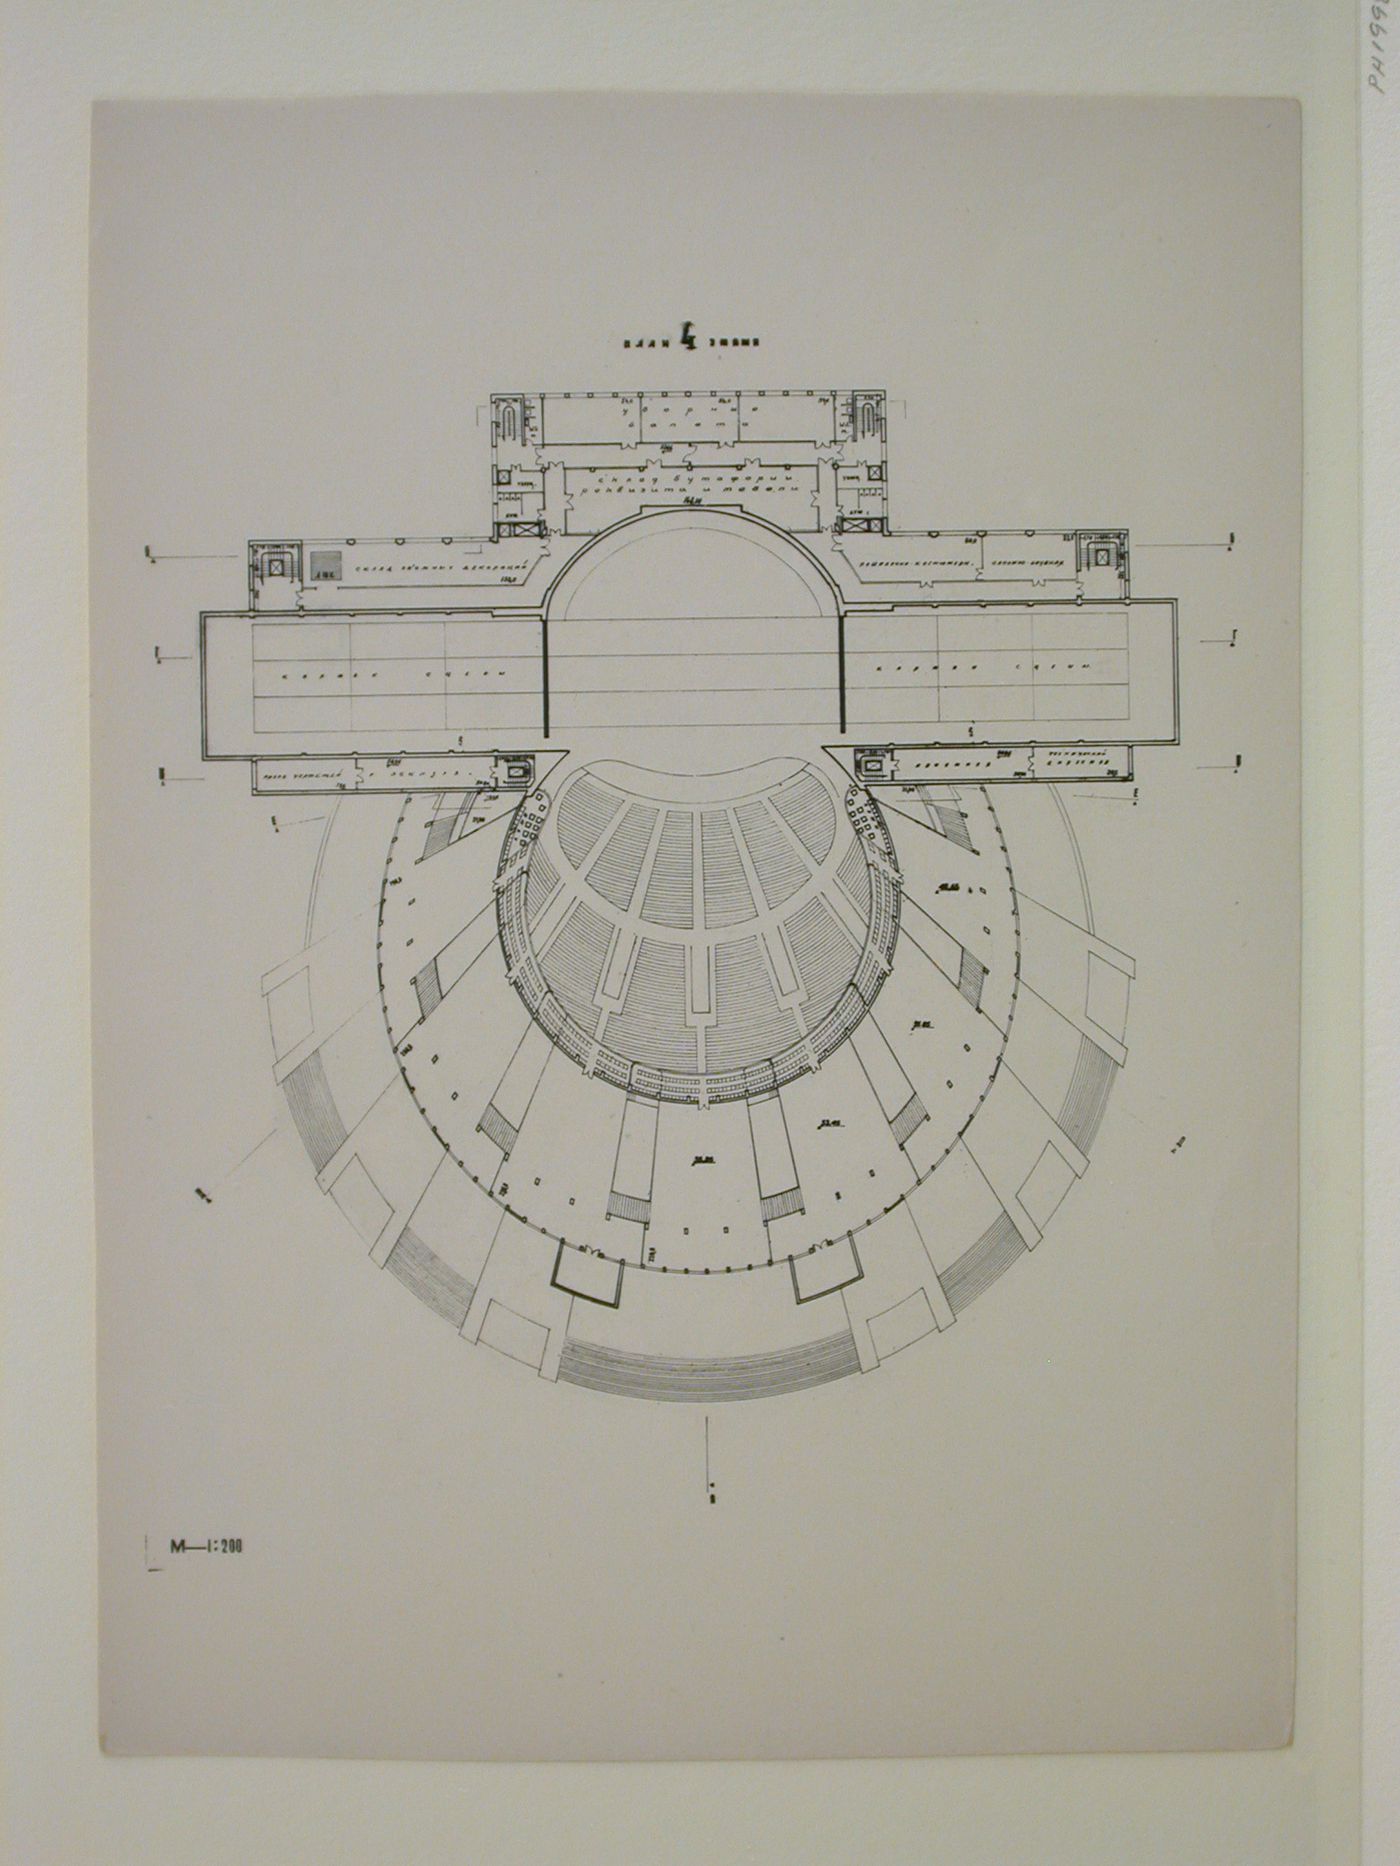 Photograph of a fourth floor plan for a Red Army Theater, Moscow